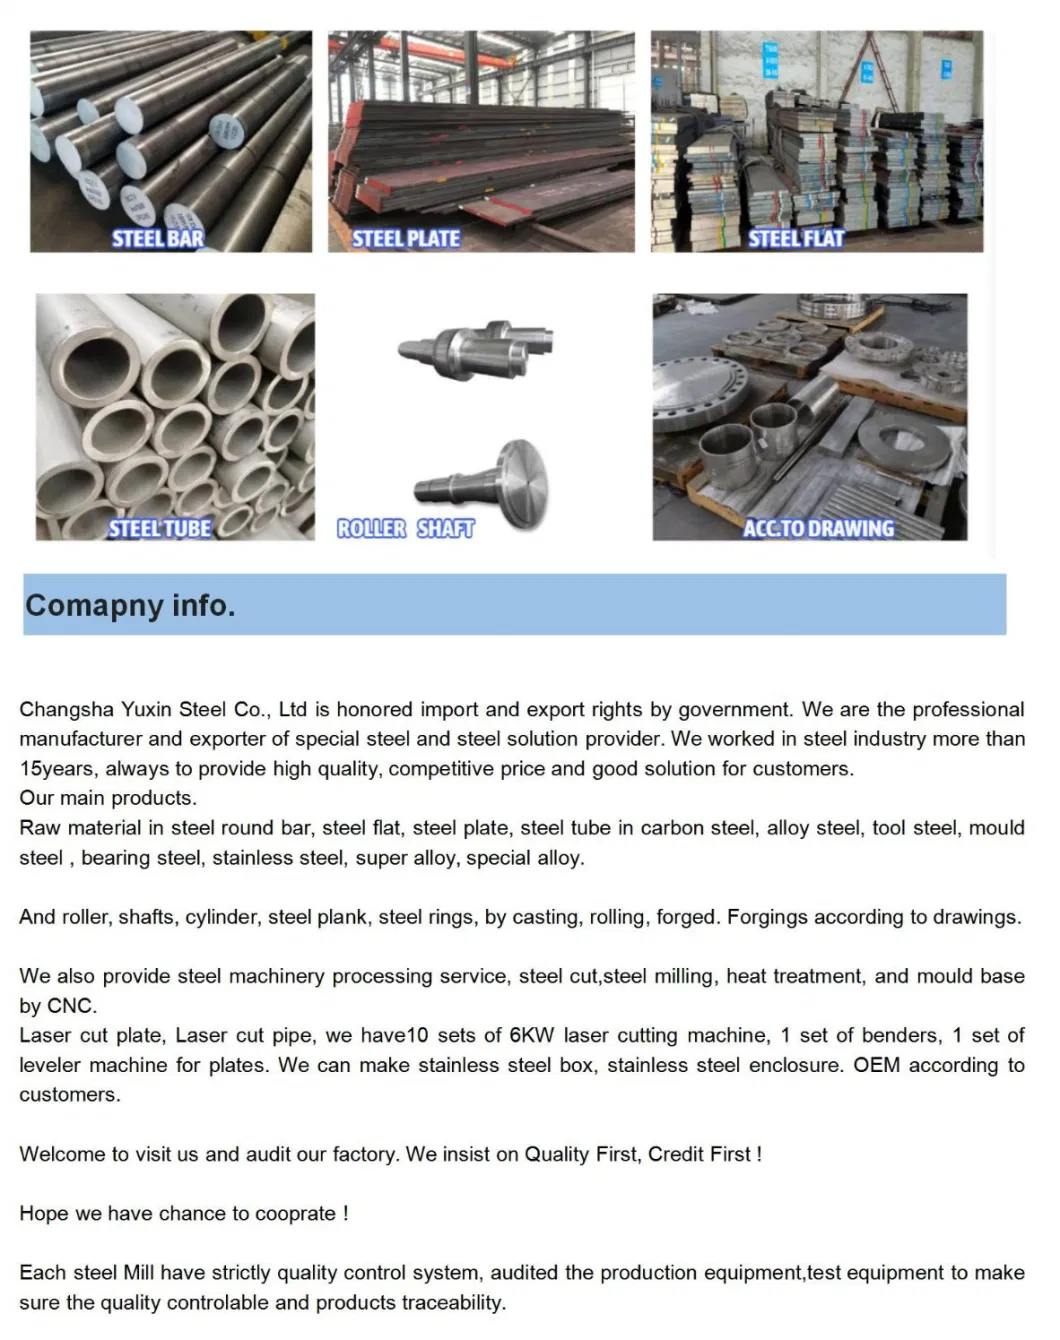 Alloy Tool Steel Round /Square/Flat Bars in H11, H13, S7, S1, L6 by China Steel Mill Manufacturer